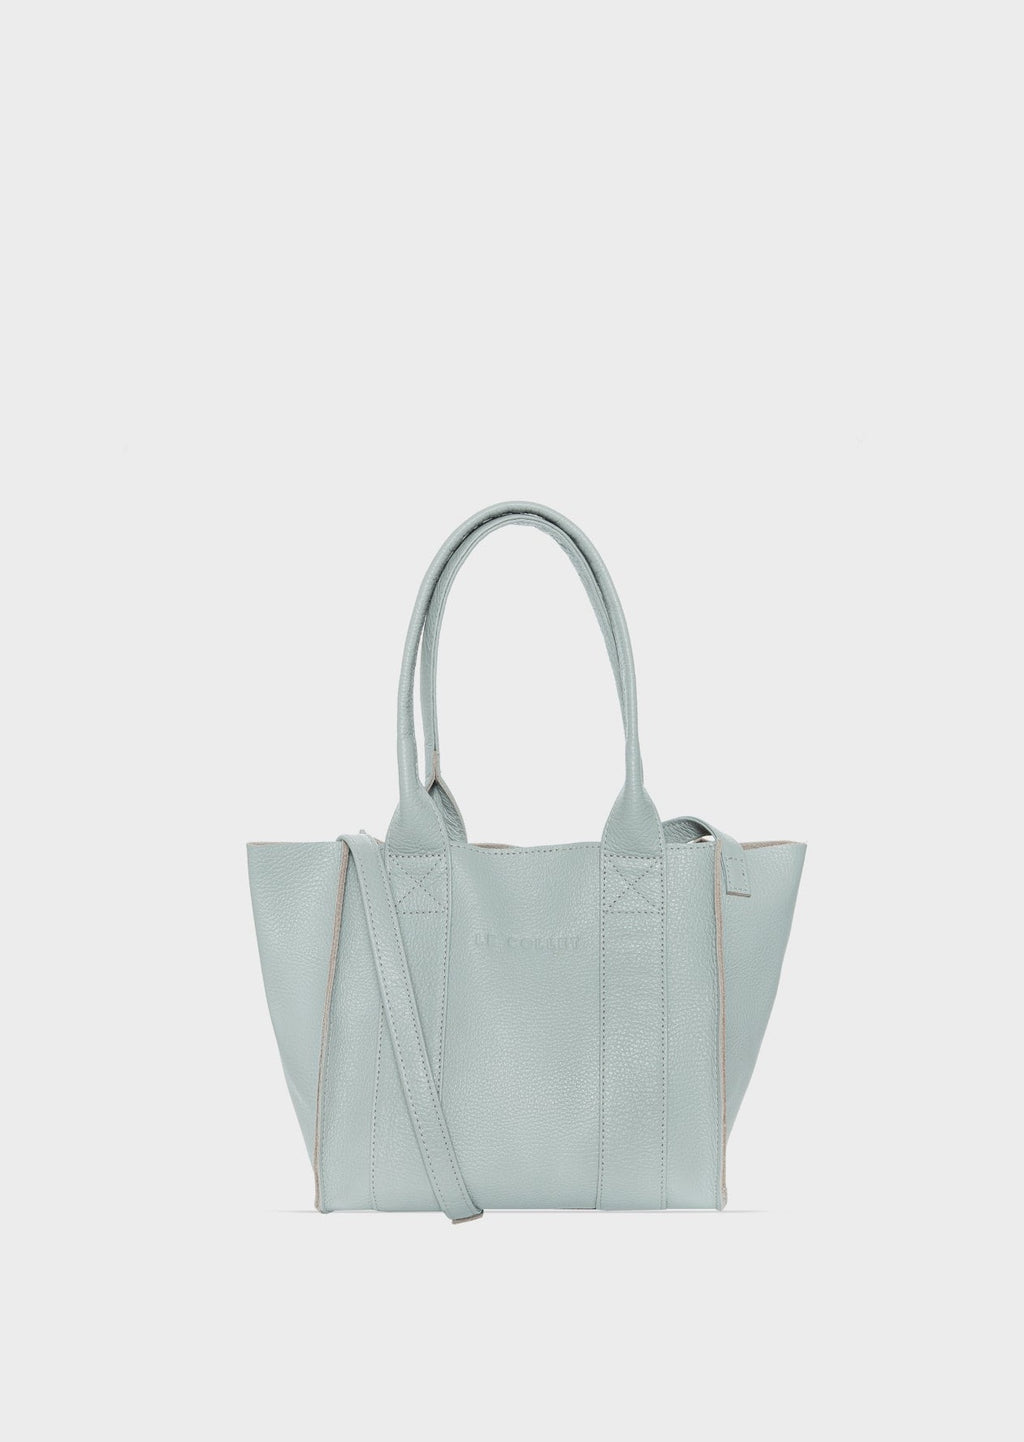 THE SMALL BAG BABY BLUE LECOLLET